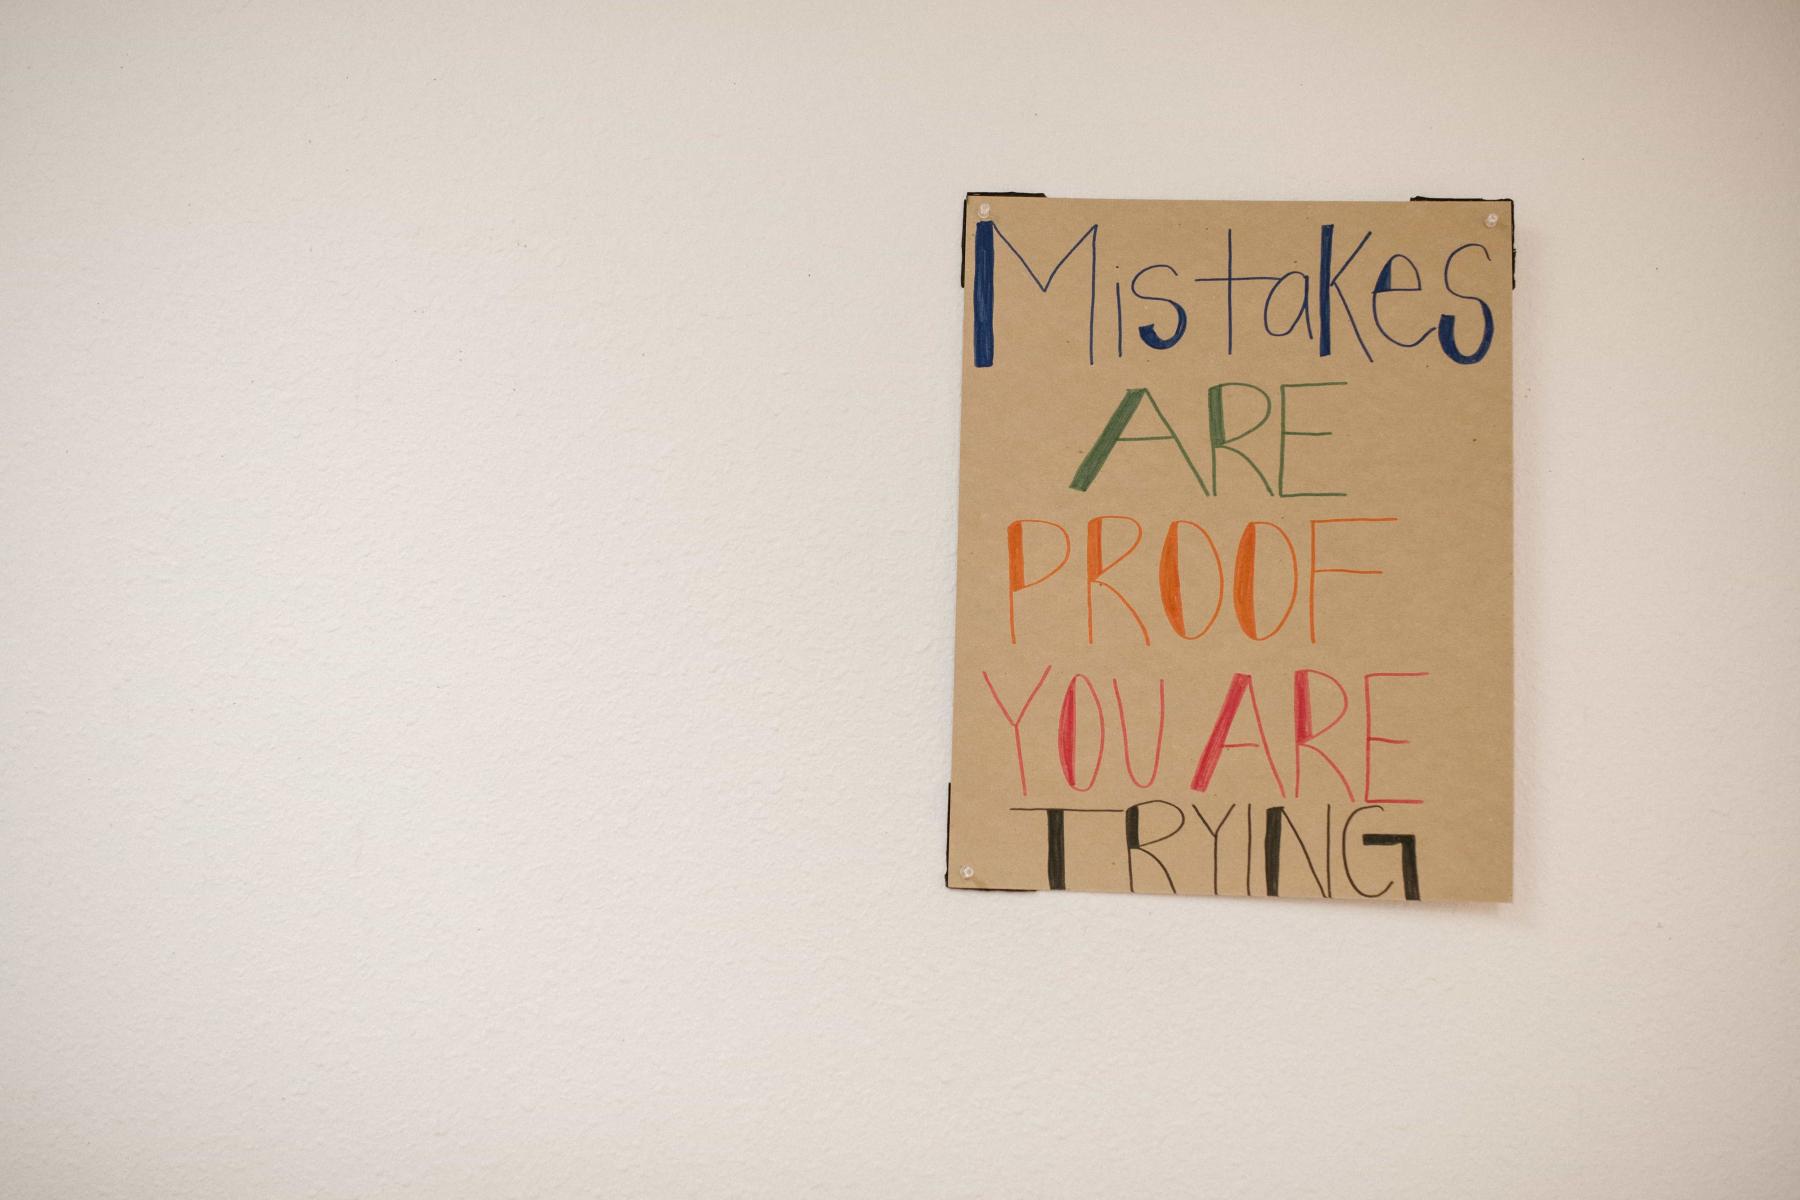 Mistakes show that you are trying sign